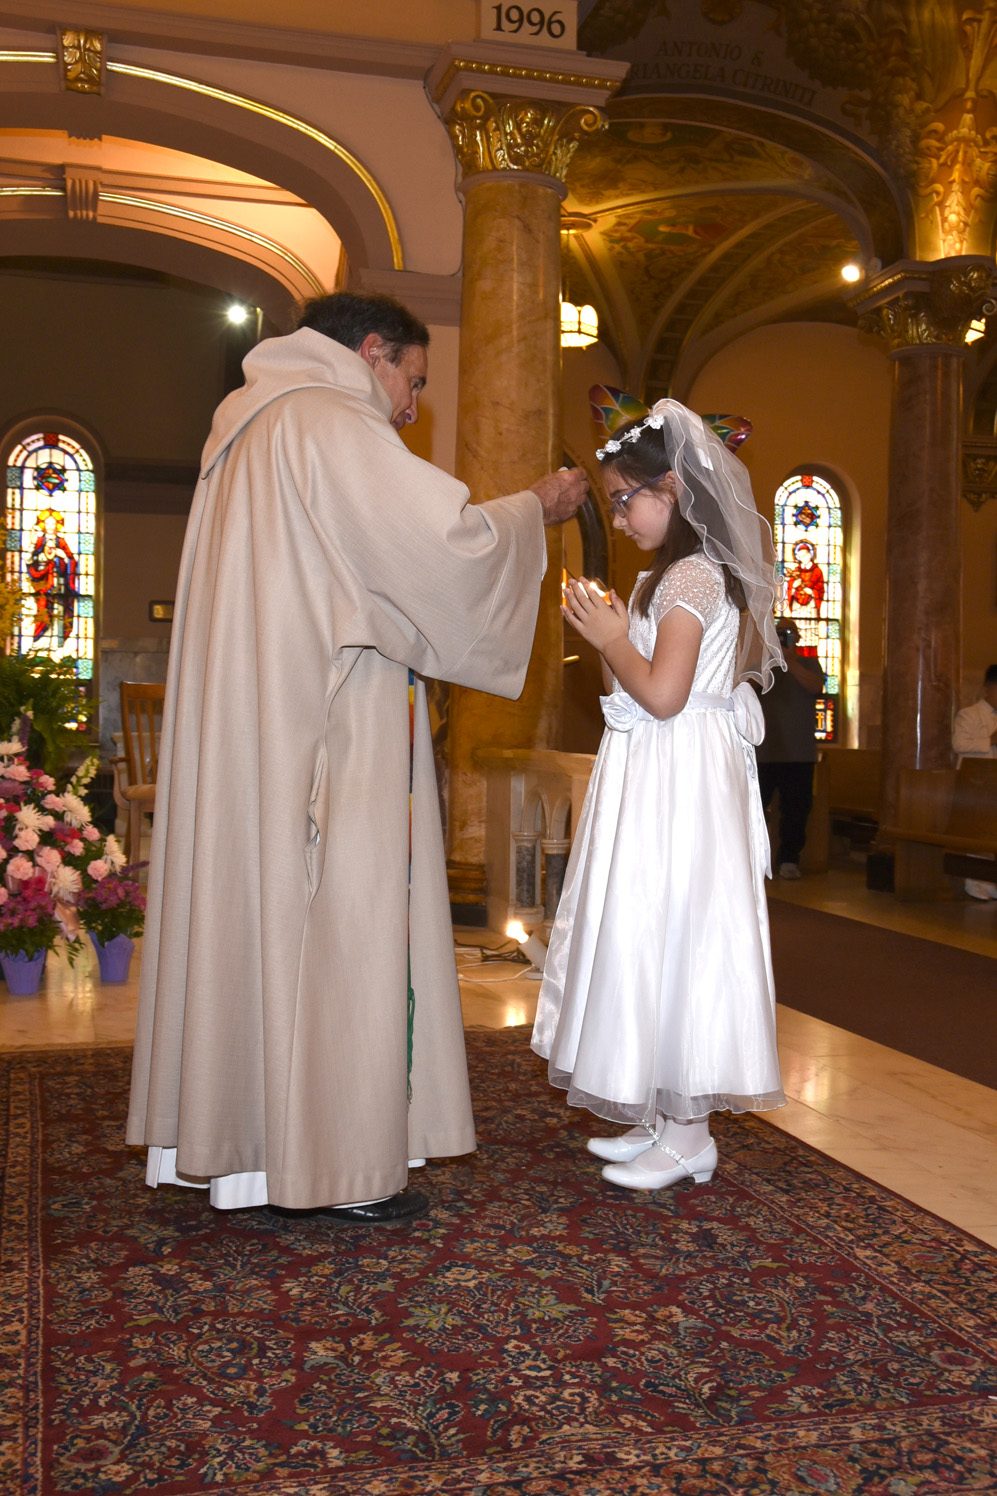 FIRST-COMMUNION-MAY-16-2021-233